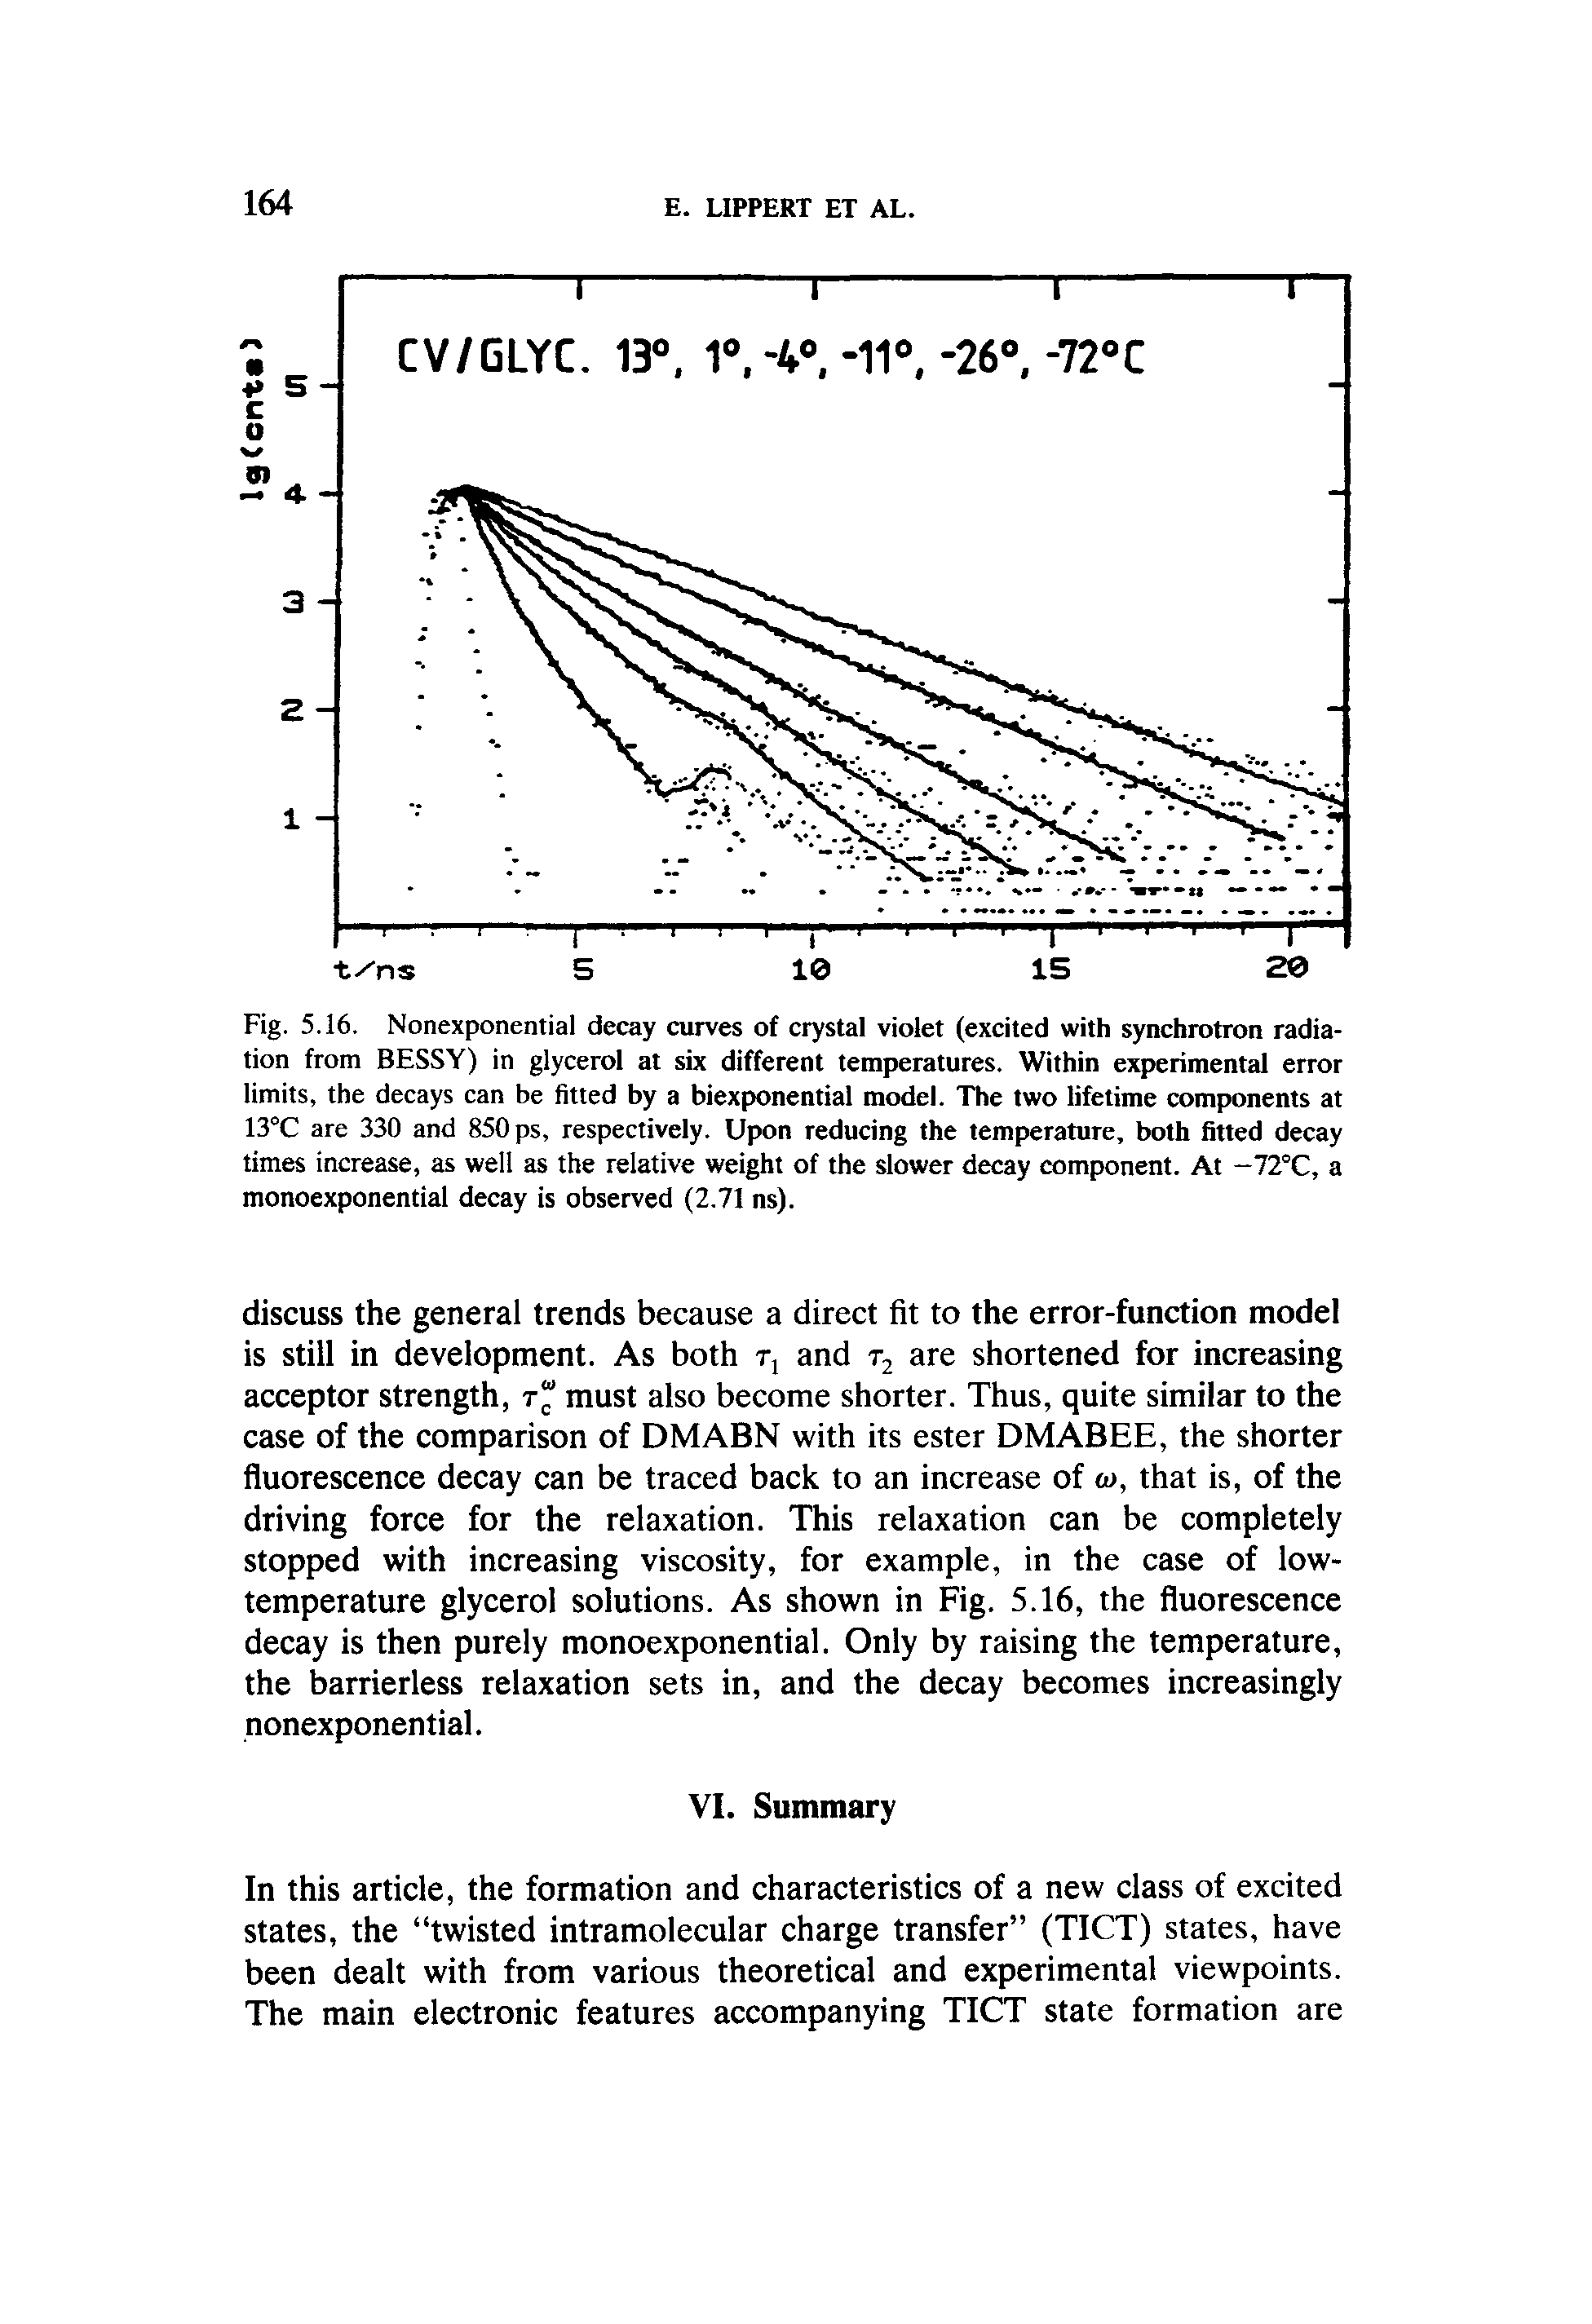 Fig. 5.16. Nonexponential decay curves of crystal violet (excited with synchrotron radiation from BESSY) in glycerol at six different temperatures. Within experimental error limits, the decays can be fitted by a biexponential model. The two lifetime components at 13°C are 330 and 850 ps, respectively. Upon reducing the temperature, both fitted decay times increase, as well as the relative weight of the slower decay component. At -72°C, a monoexponential decay is observed (2.71 ns).